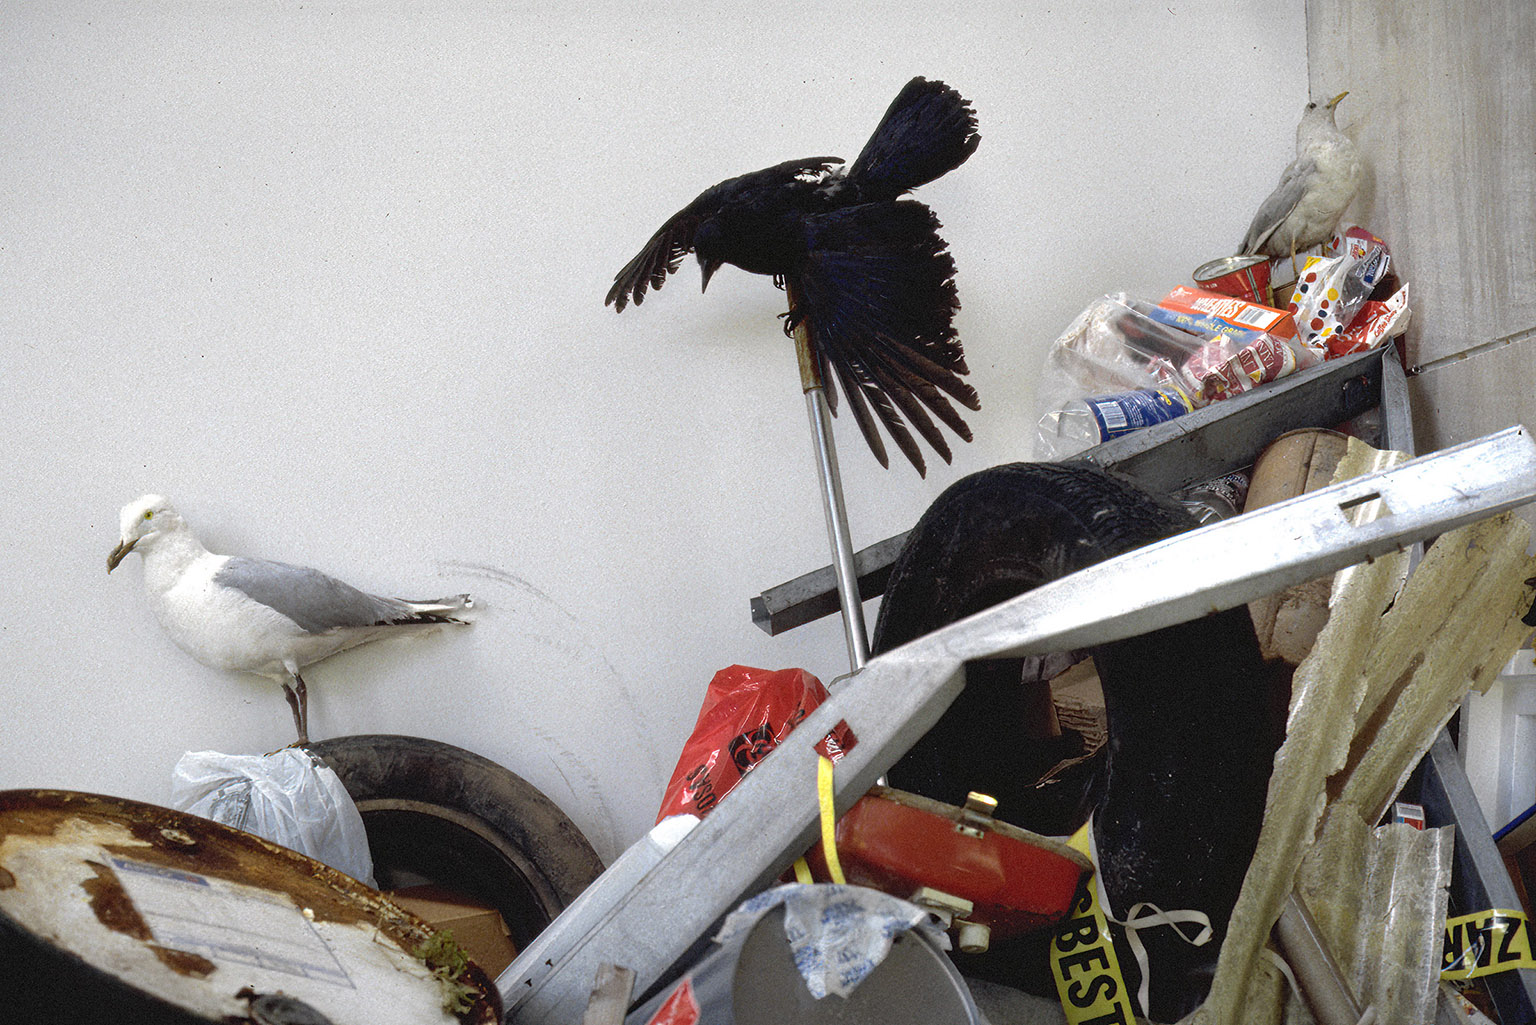 installation with taxidermied birds and found garbage